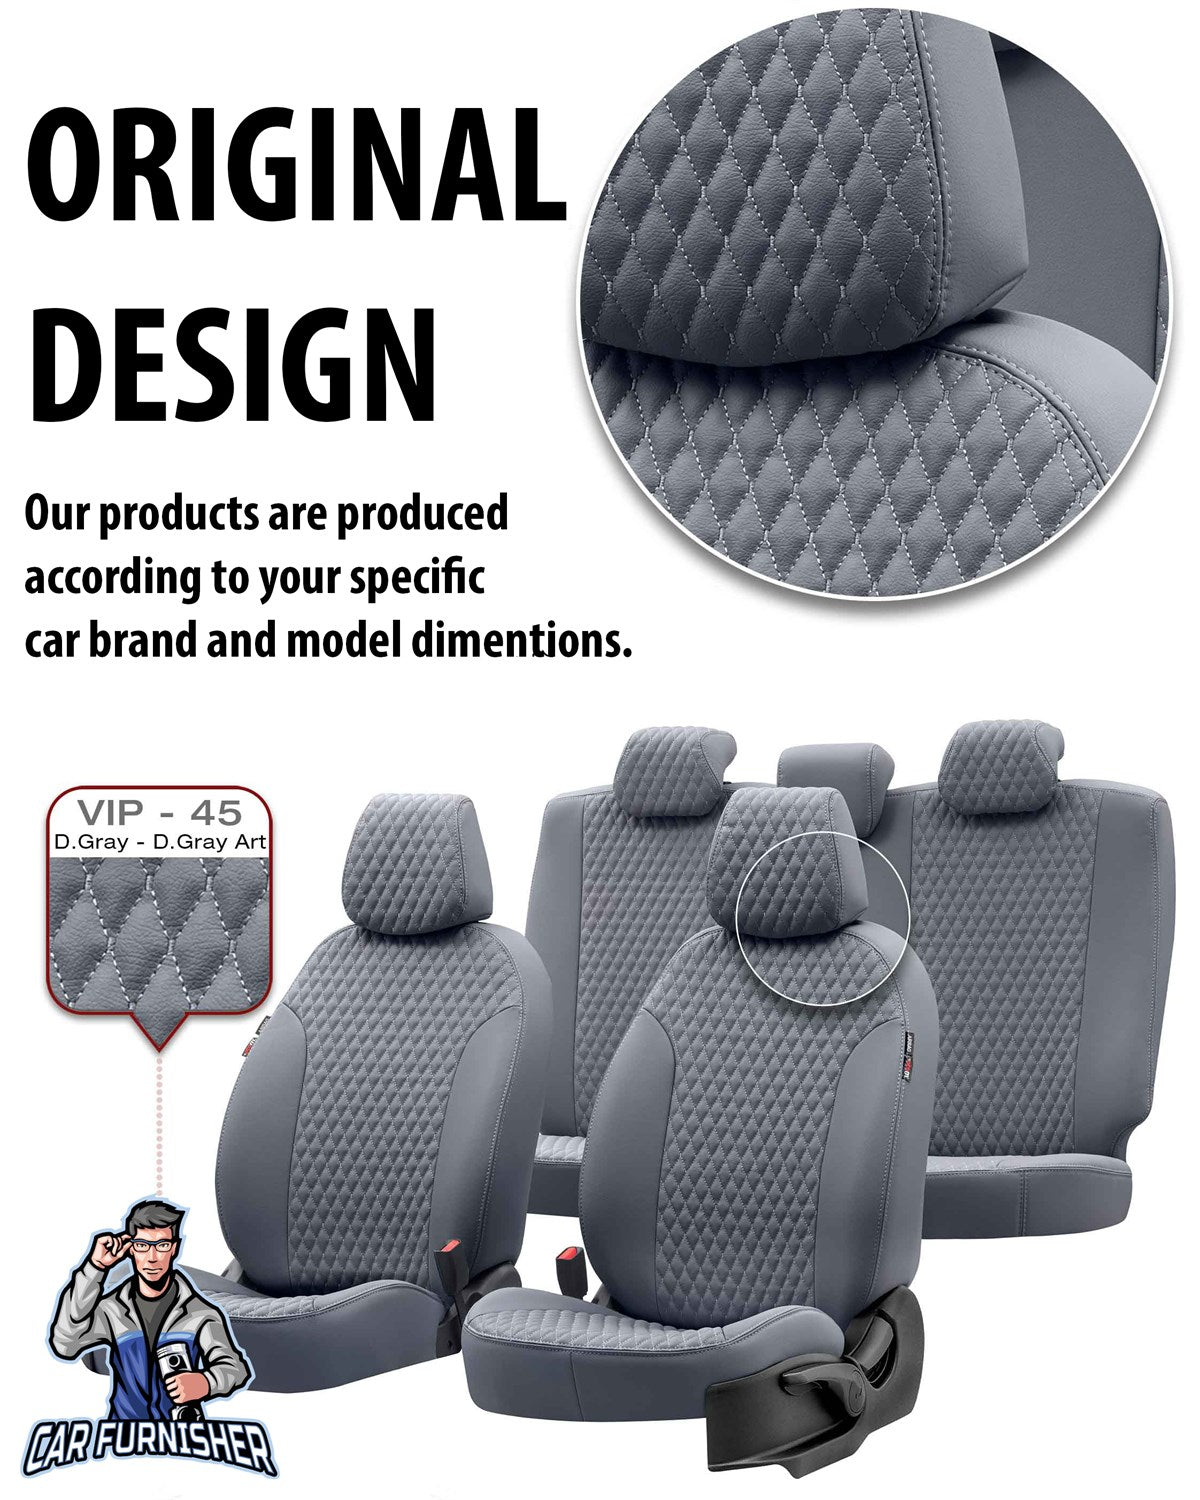 Volkswagen Caddy Seat Cover Amsterdam Leather Design Smoked Black Leather